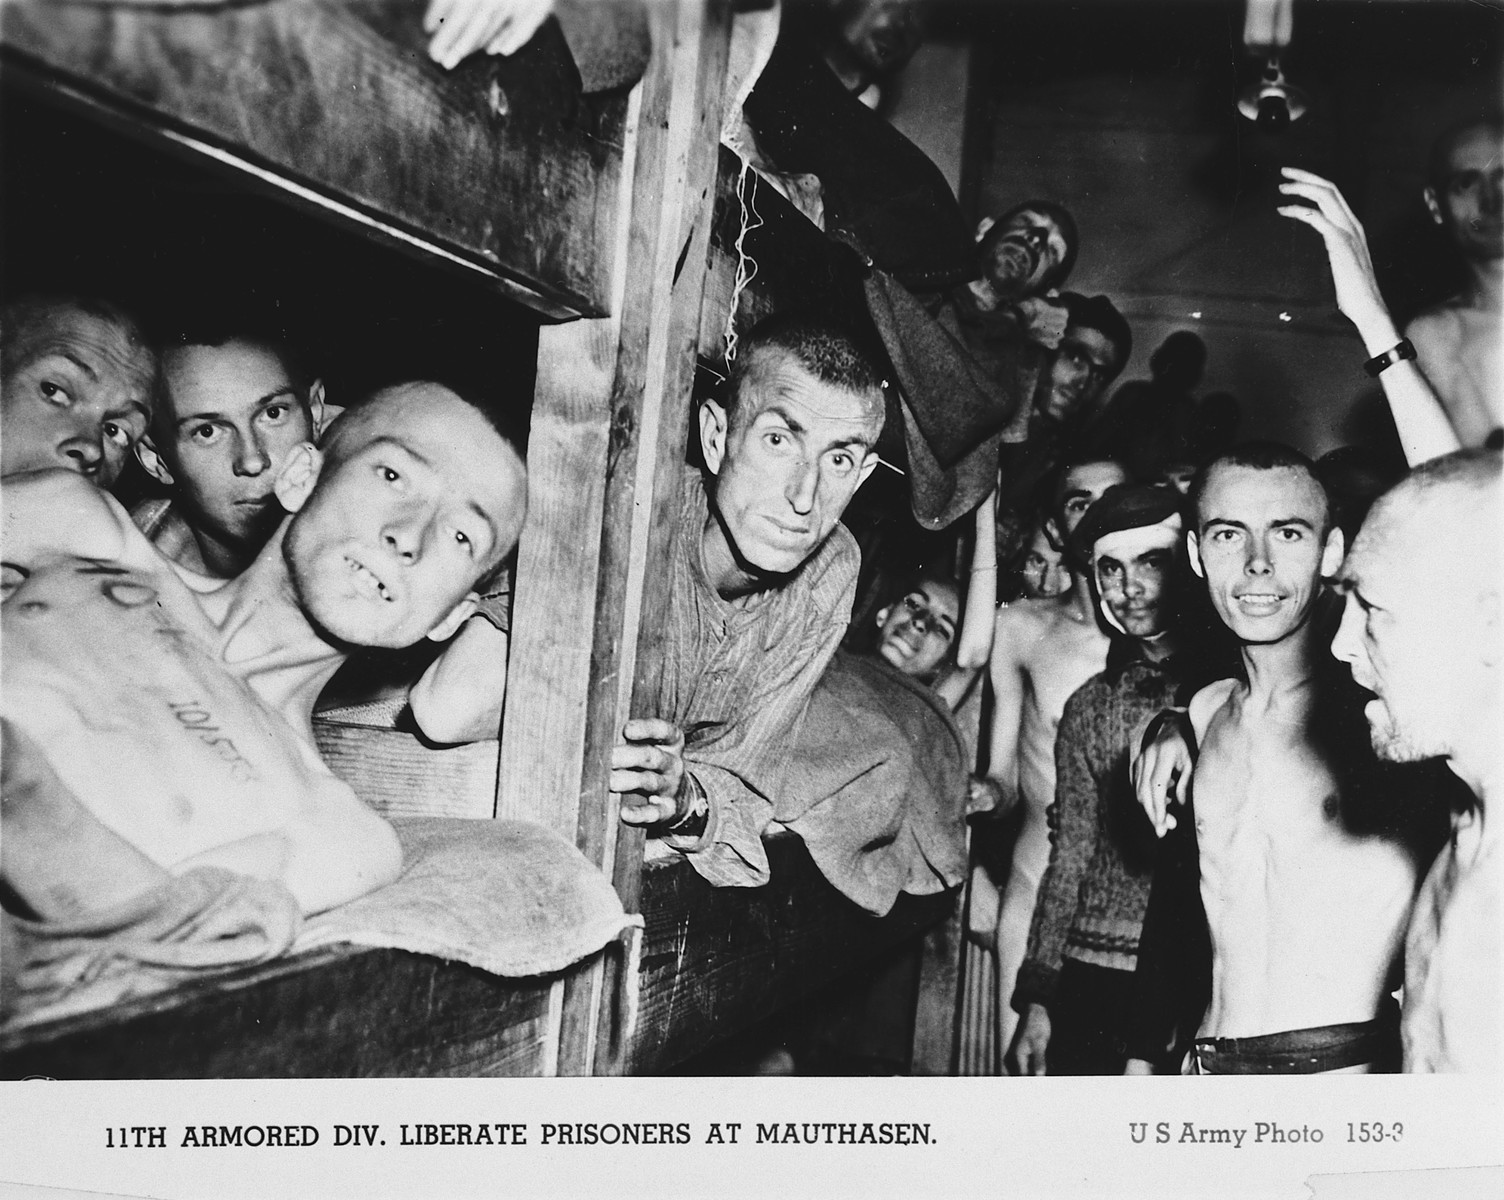 Prisoners liberated from Mauthausen, many crowded into a wooden bunk, celebrate their liberation by the American 11th Armored Division.

The man pictured second from the left has been identified as Ferencz Otto Braun.